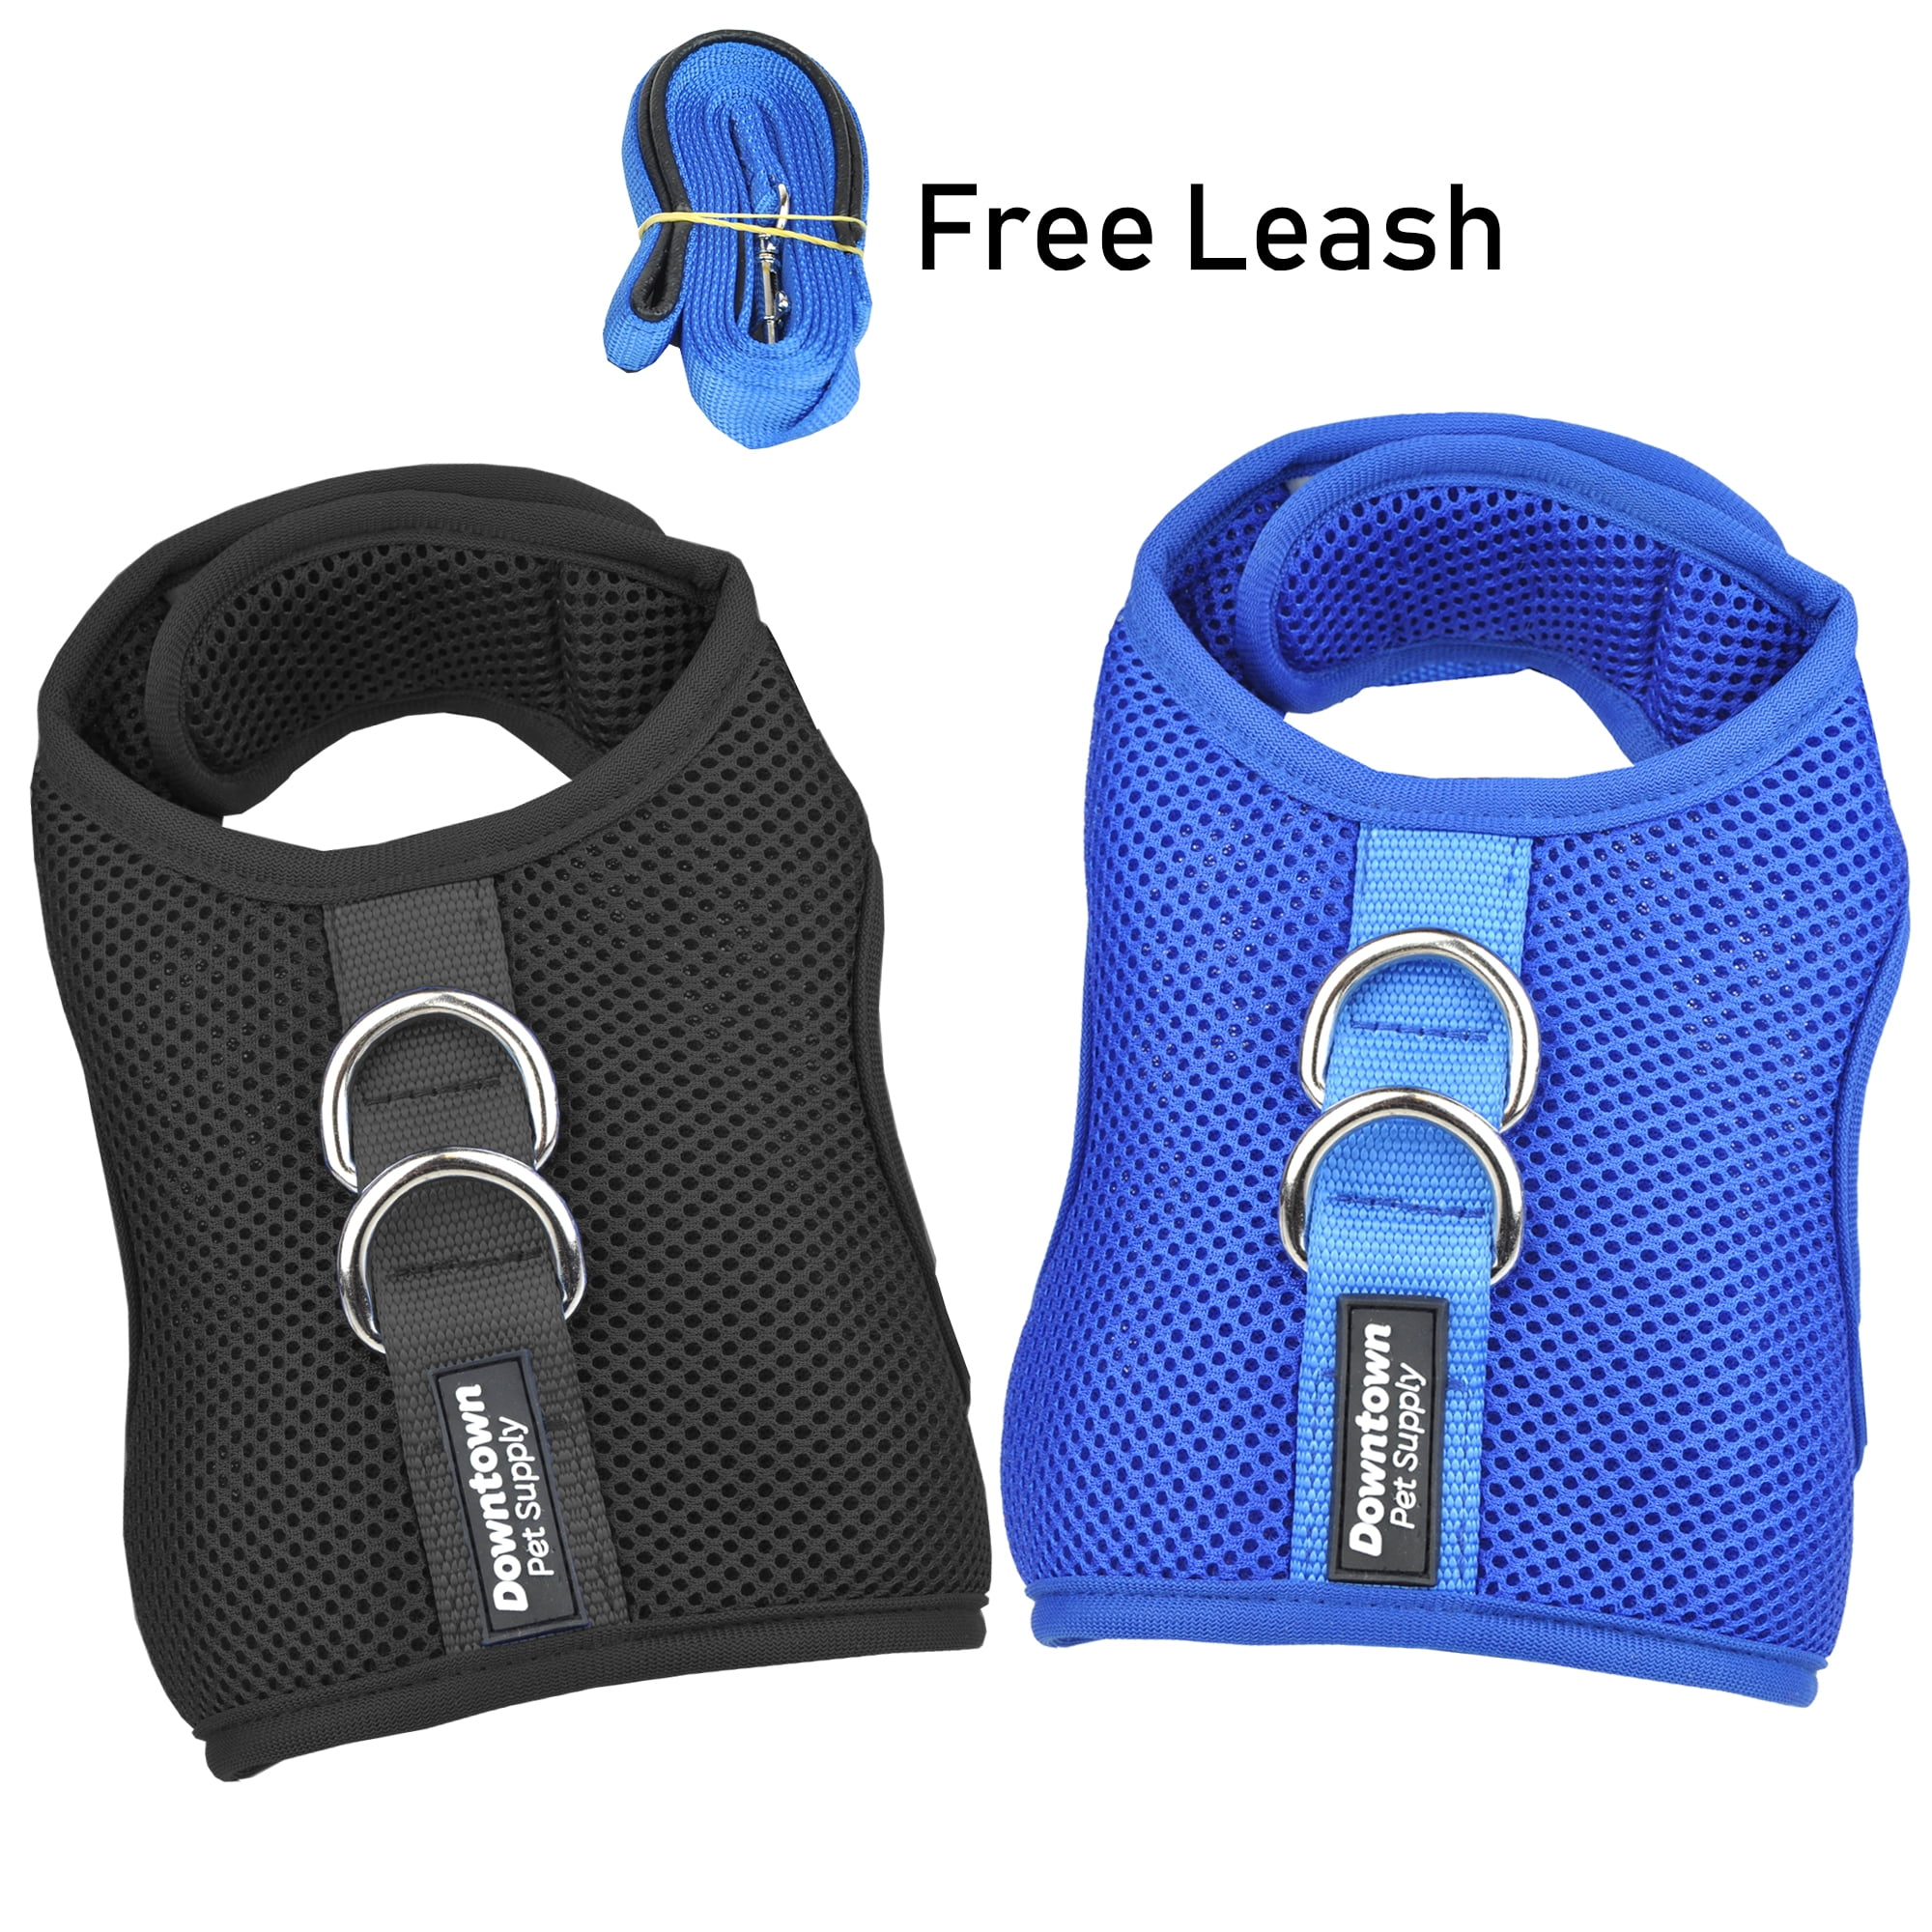 Medium Large Cats and Small Dogs/Puppy Blue, Large Downtown Pet Supply Best Cat Vest Harness and Leash Combo with Added Safety Features to Make it Escape Proof for Small 